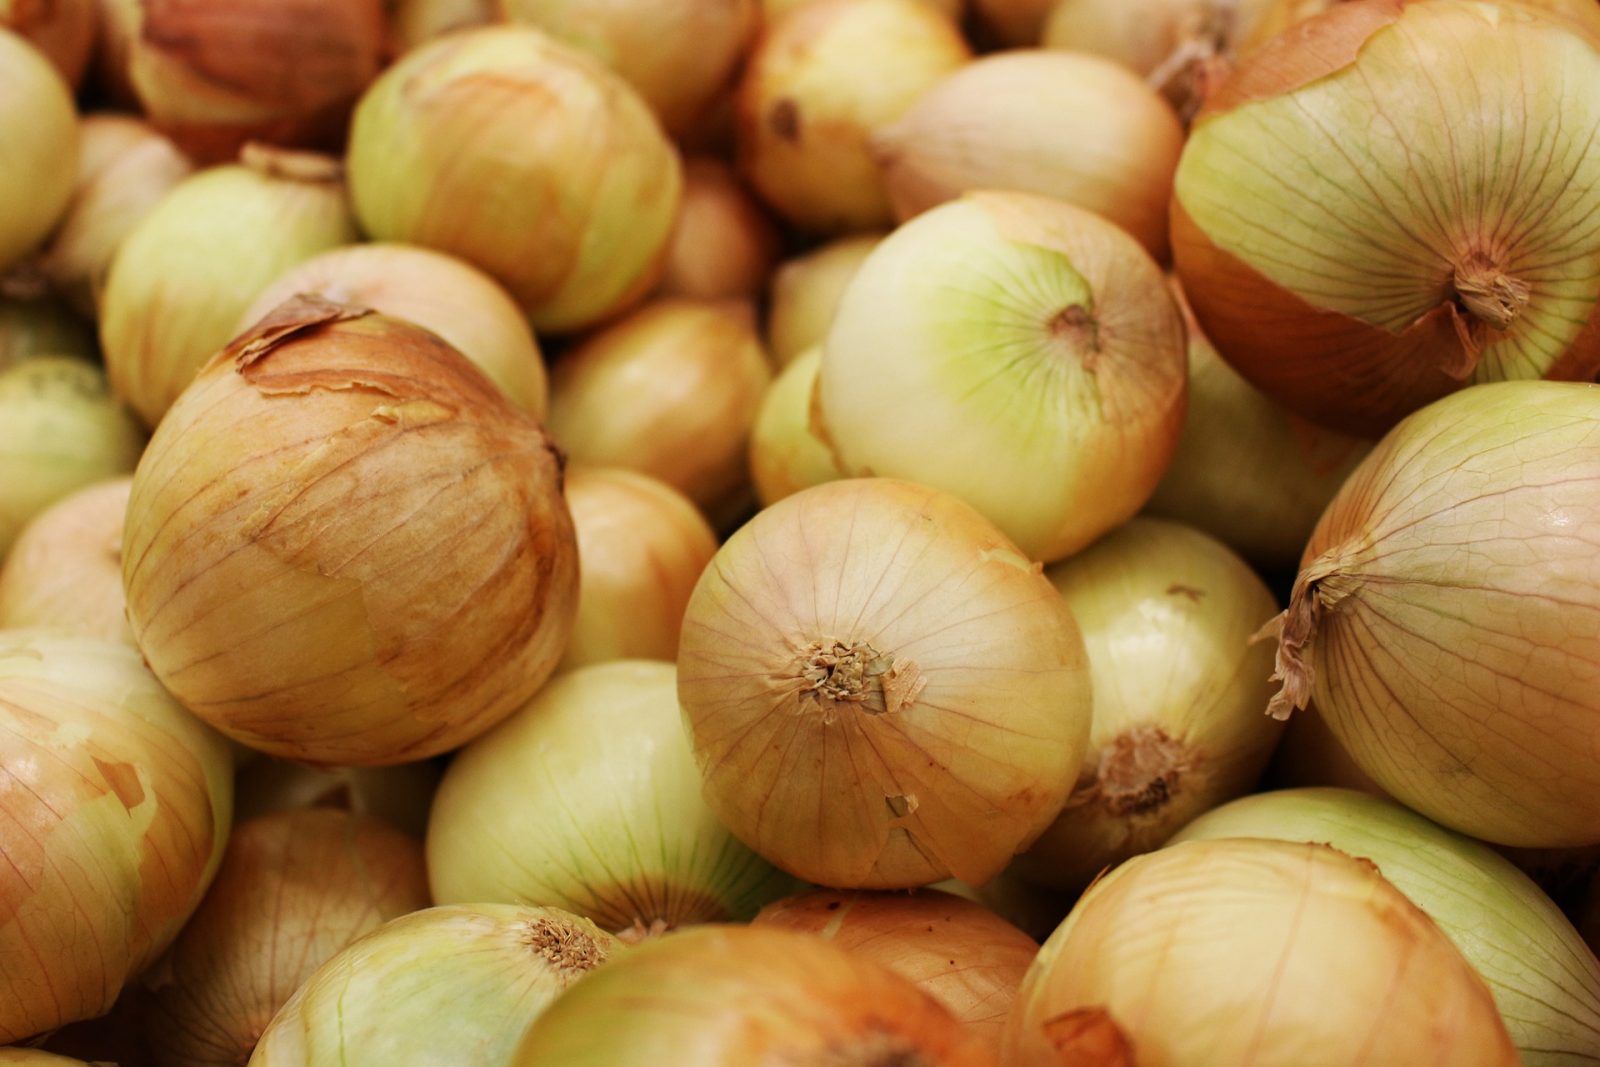 Health Canada recalls several onion products